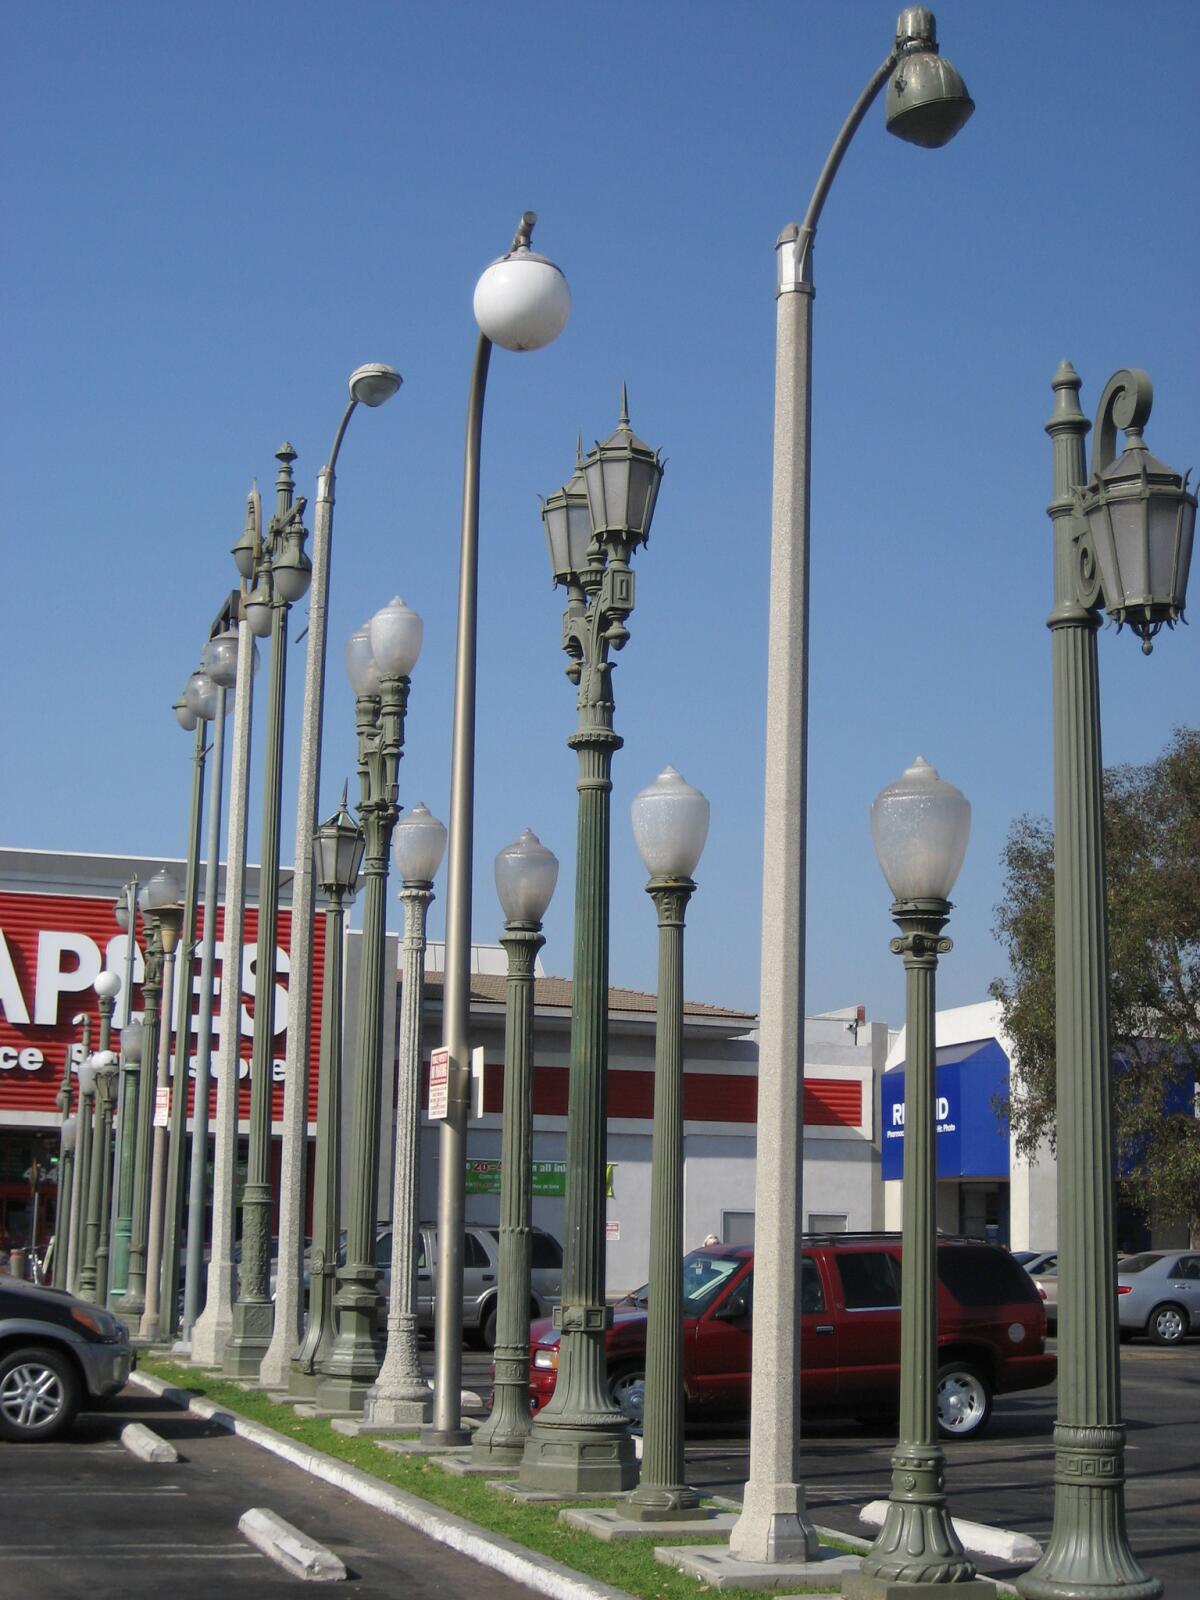 "Vermonica" by Sheila Klein, seen in 2001 in its original location in a strip mall at Santa Monica Boulevard and Vermont Avenue.